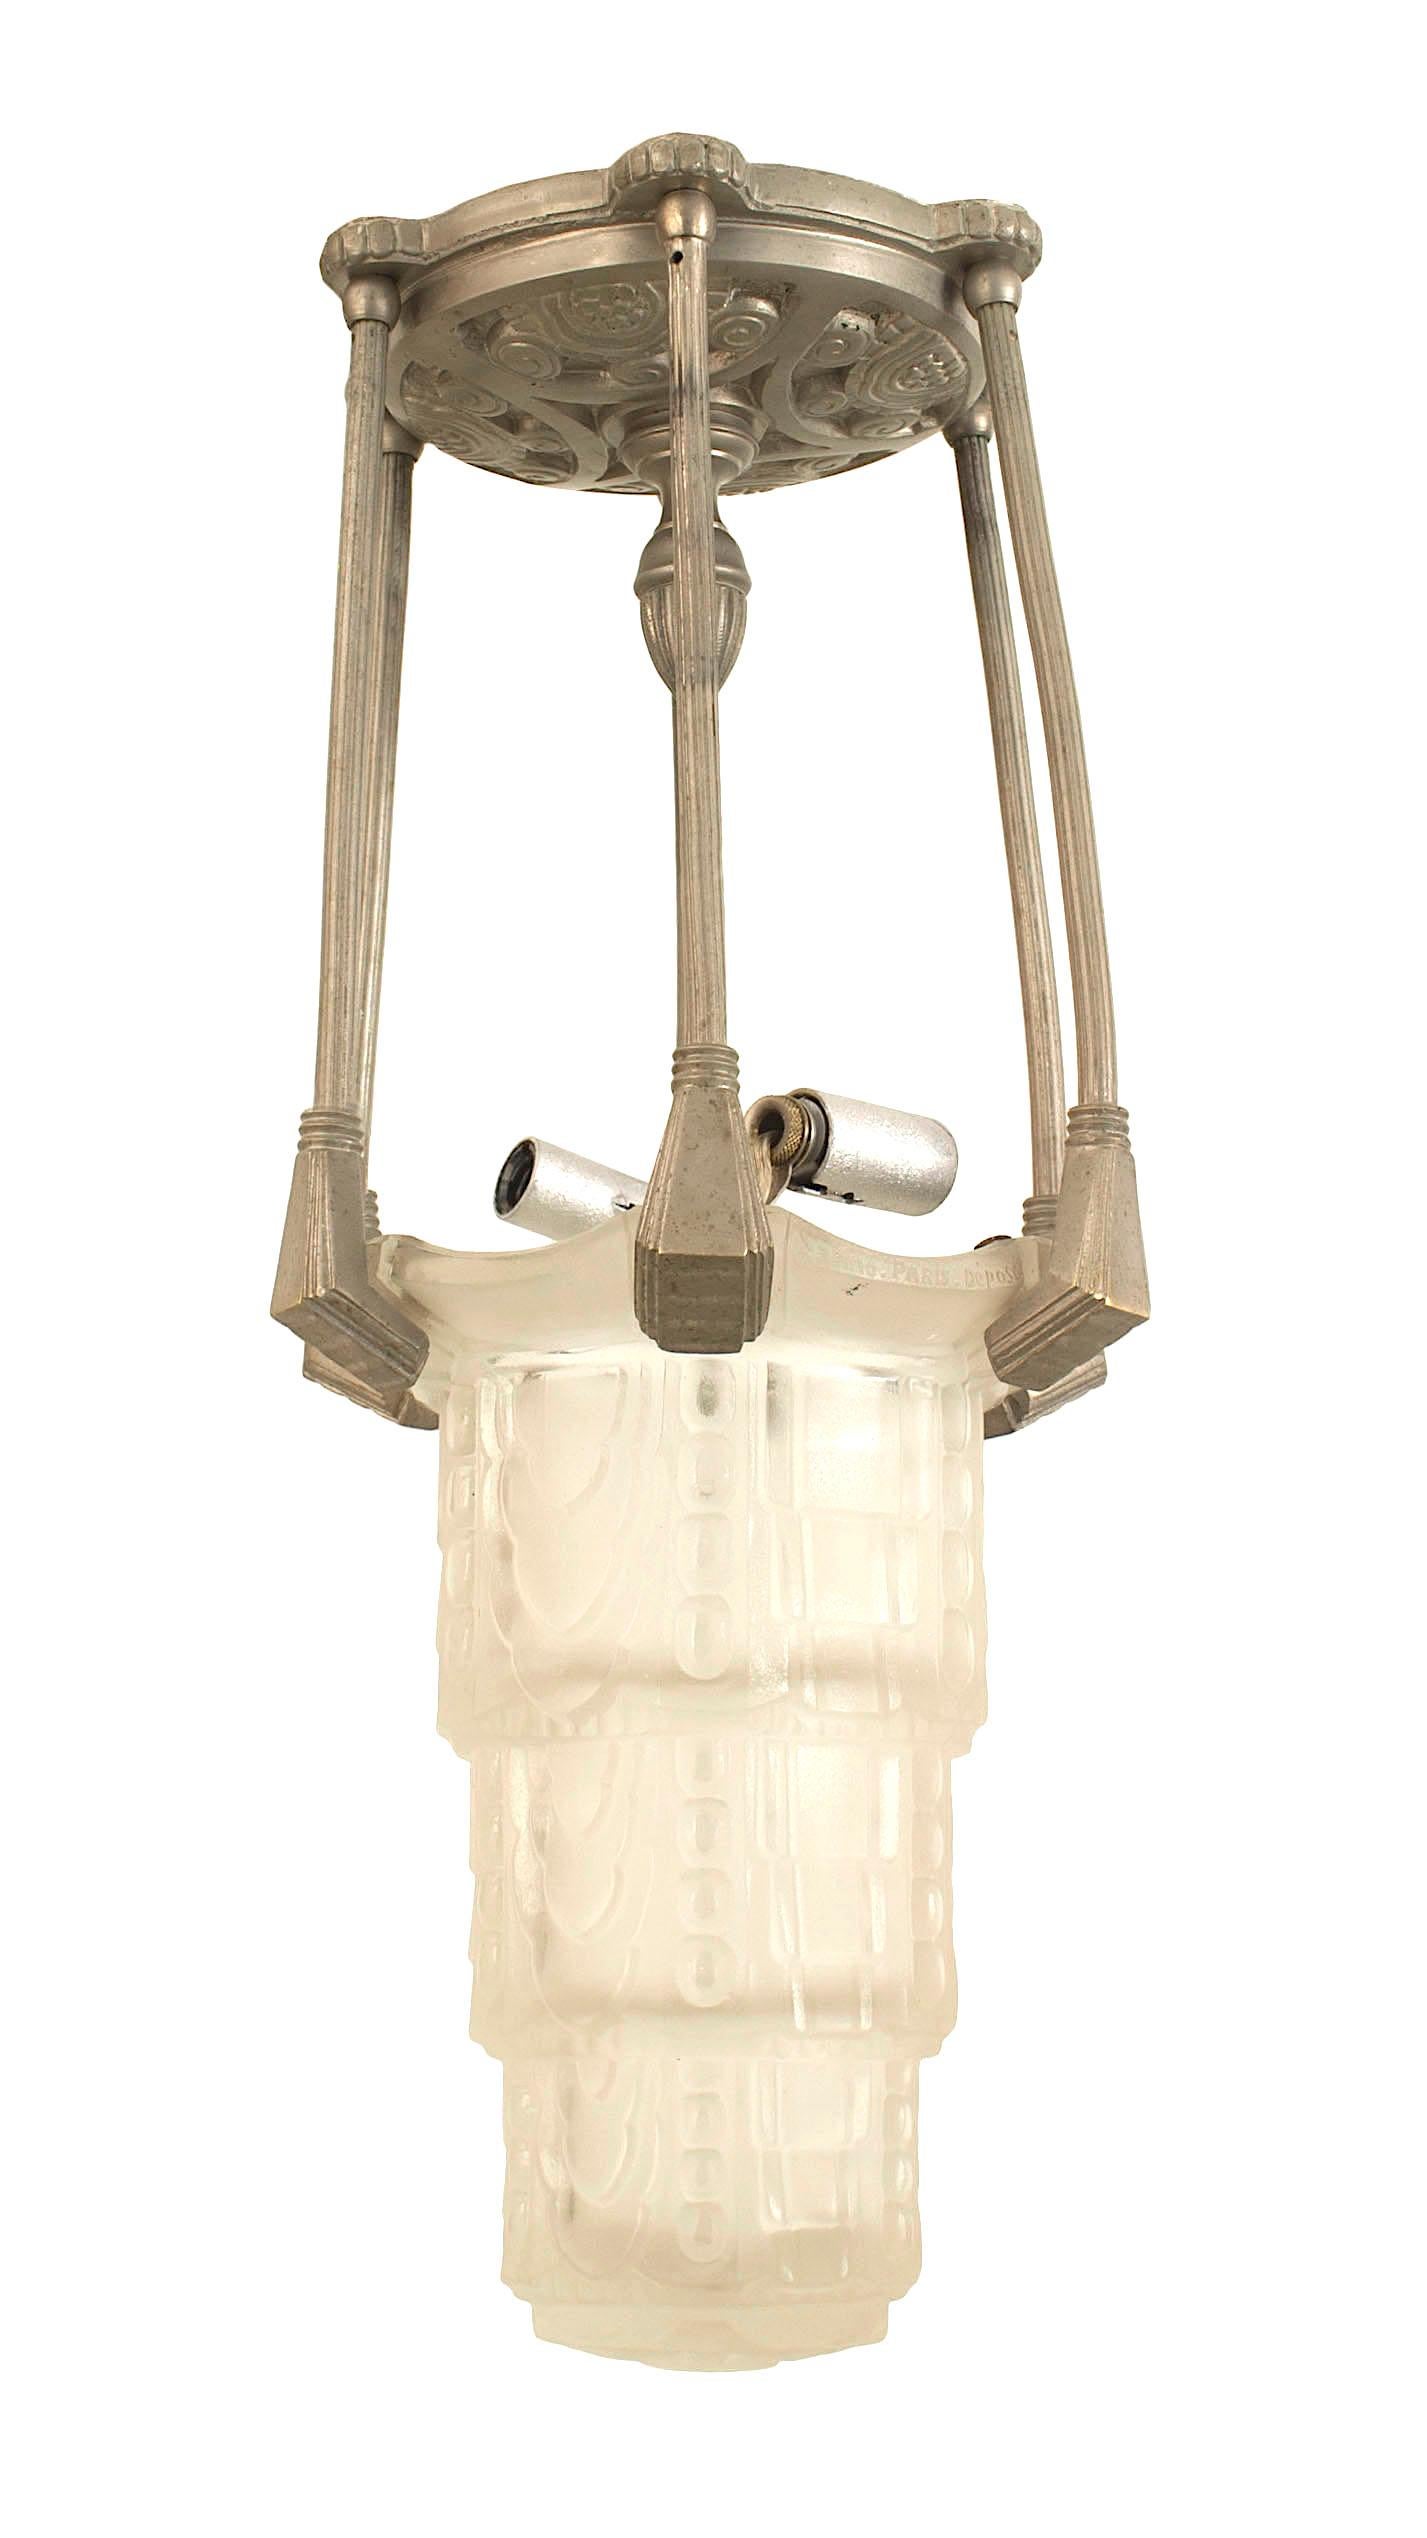 French Art Deco (circa 1925) small lantern with a 6 sided frosted 3 tier molded glass shade suspended from a silvered metal frame under a large round canopy (SABINO).
